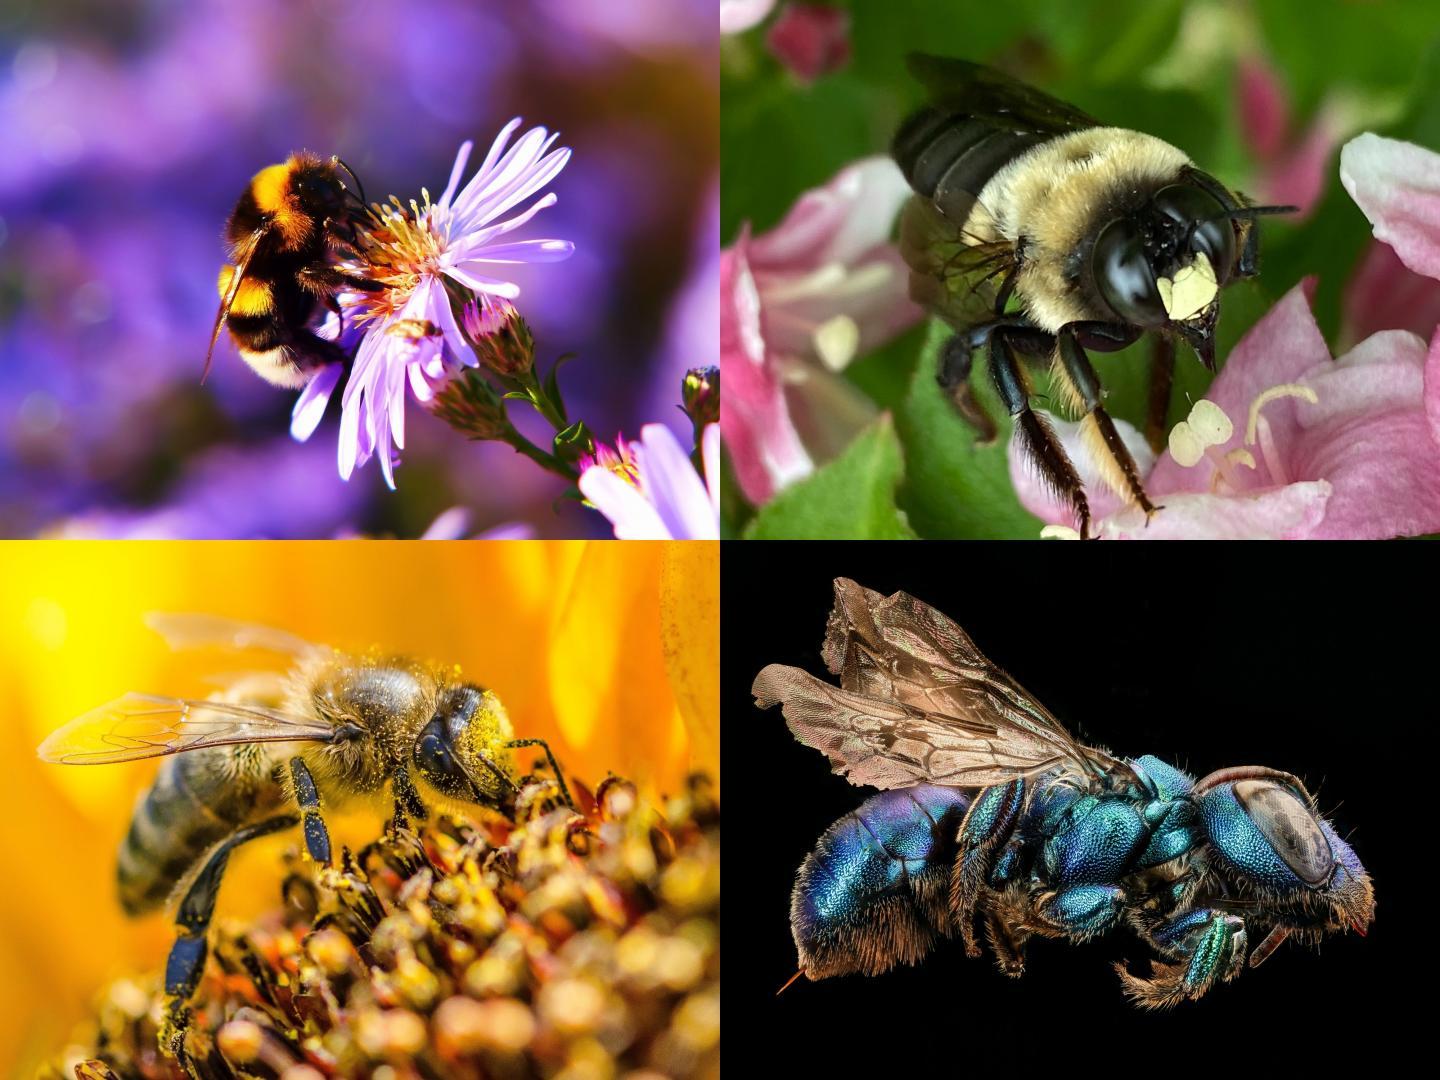 Study Finds Decline of Bees & Other Pollinators a Threat to Crop Yields ...